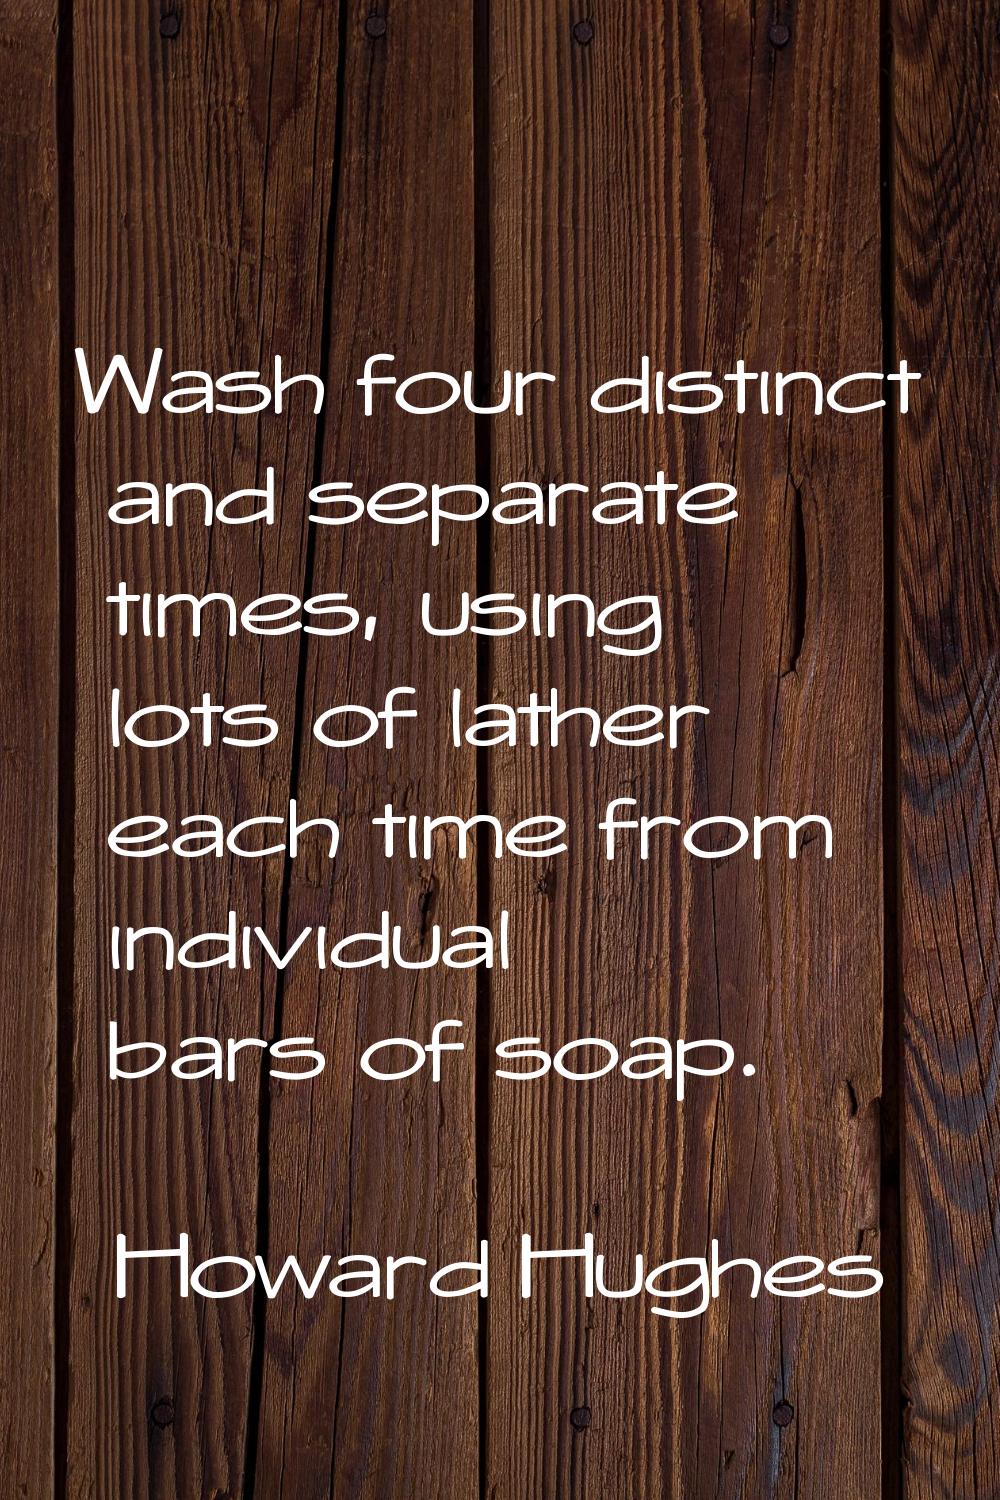 Wash four distinct and separate times, using lots of lather each time from individual bars of soap.